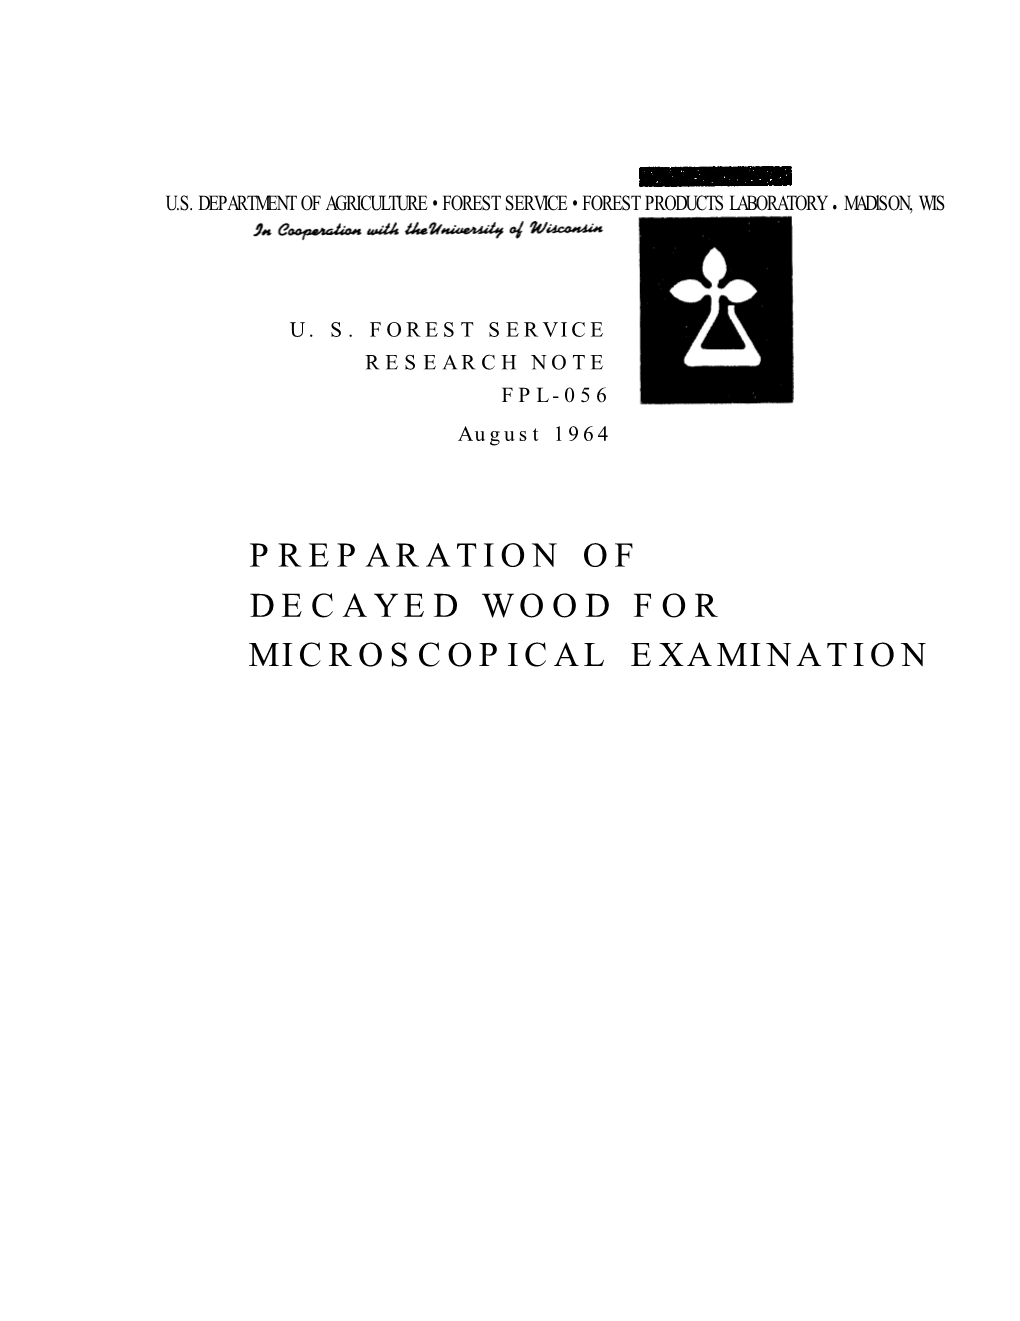 PREPARATION of DECAYED WOOD for MICROSCOPICAL EXAMINATION Table of Contents